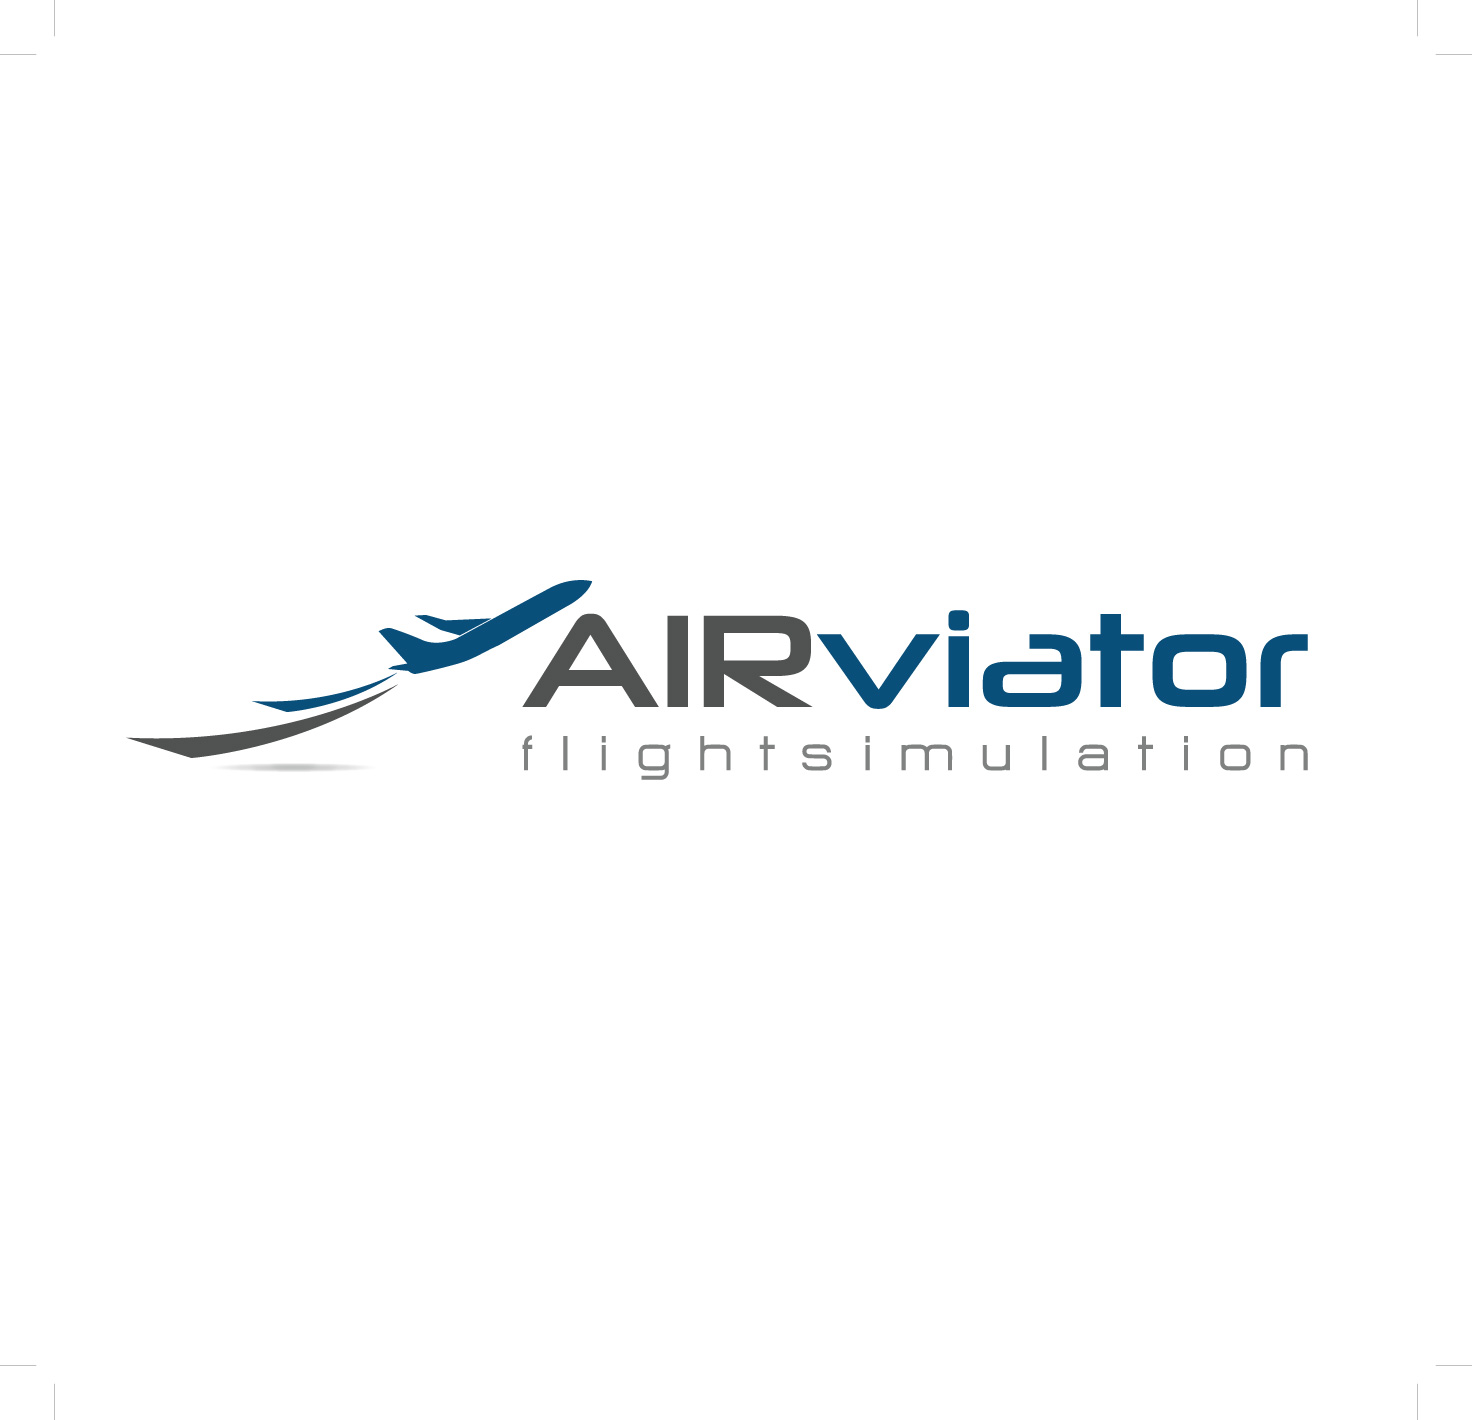 AIRviator flight simulation in Mosbach